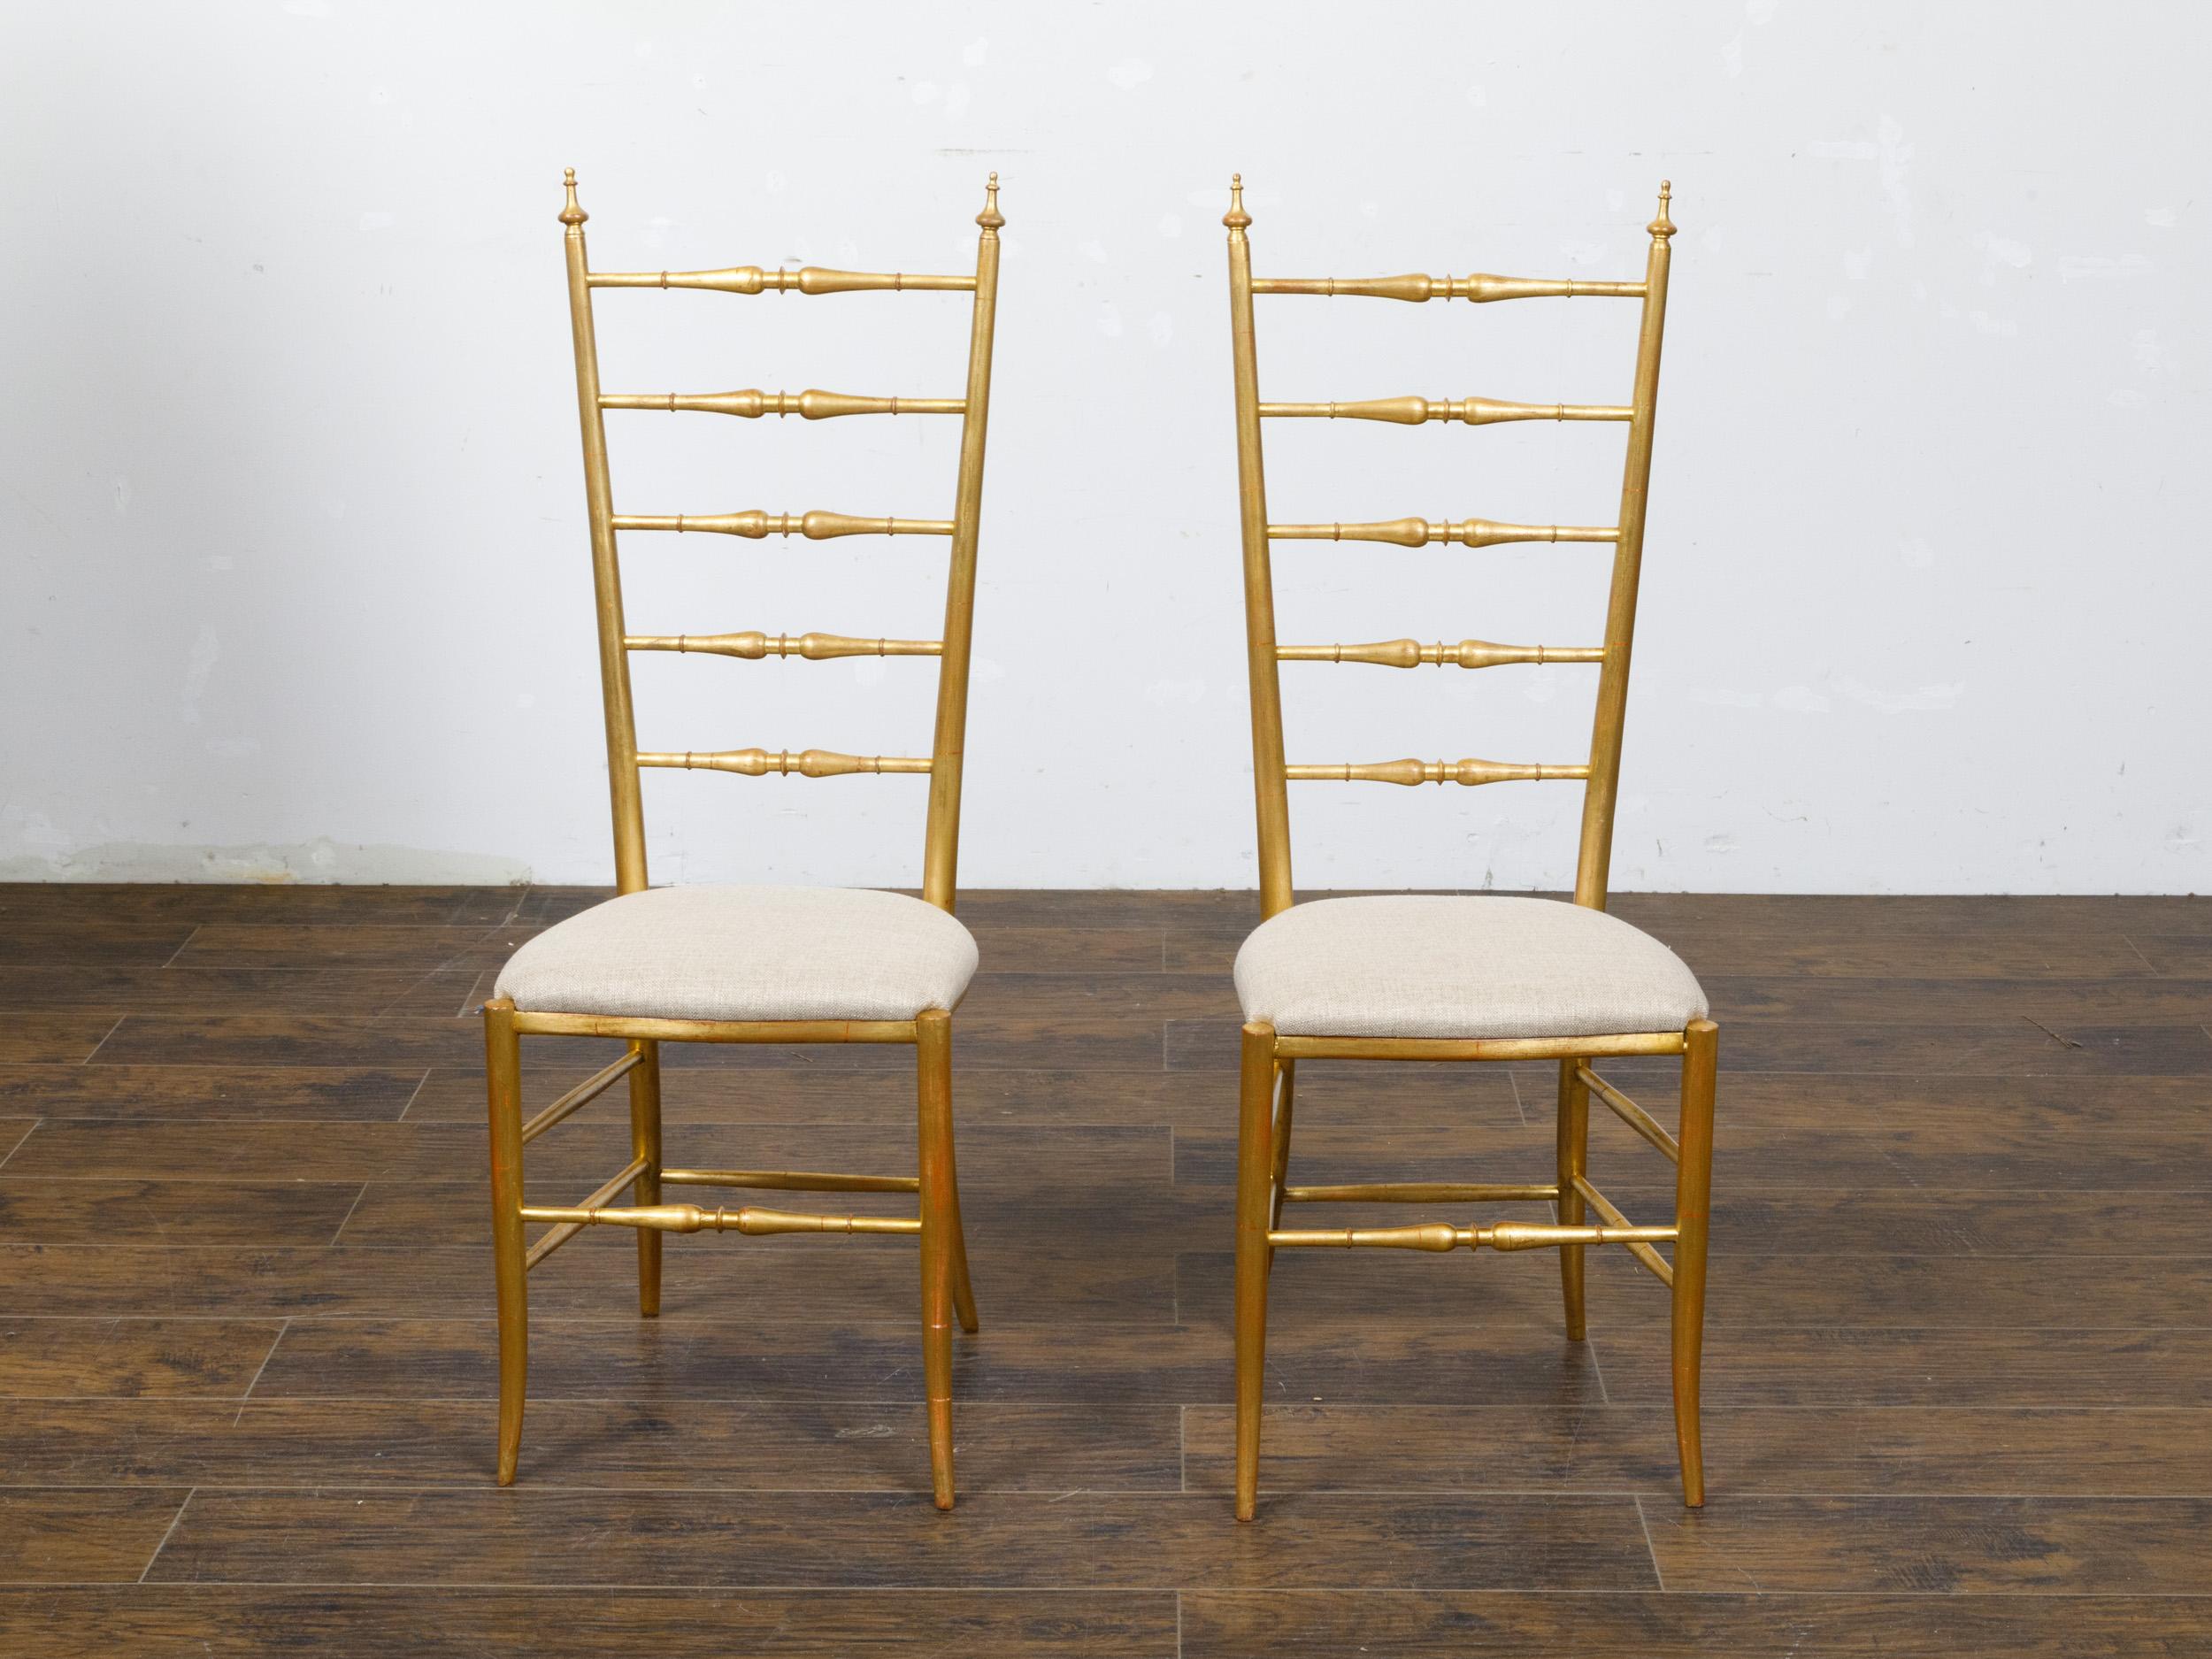 Pair of Midcentury Italian Gilt Wood High Back Side Chairs with Upholstery For Sale 8